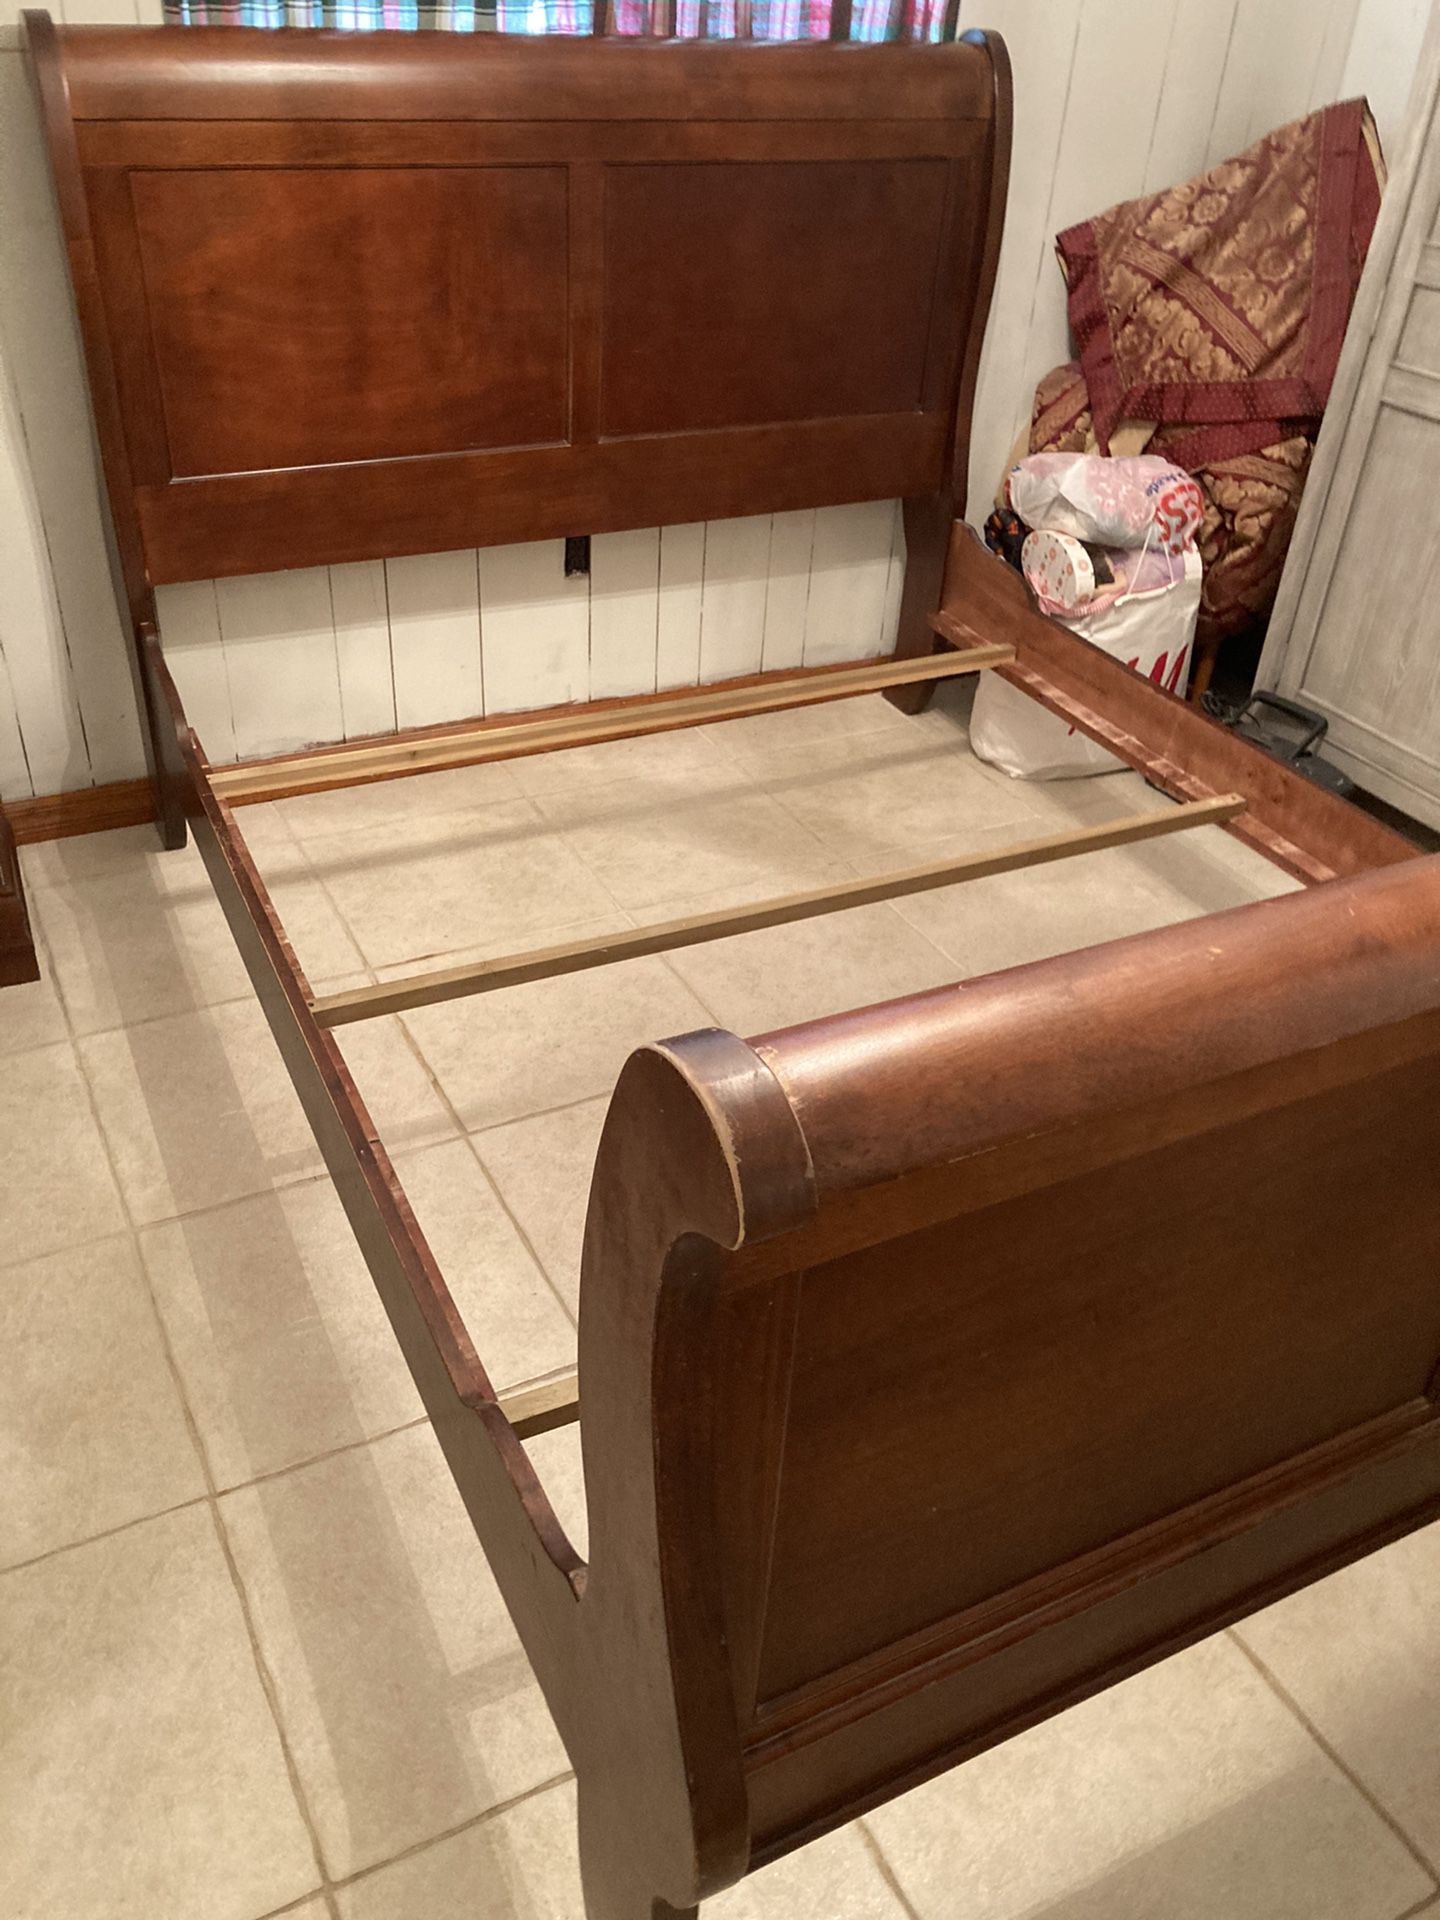 Sleigh bed and 1 side table and dresser